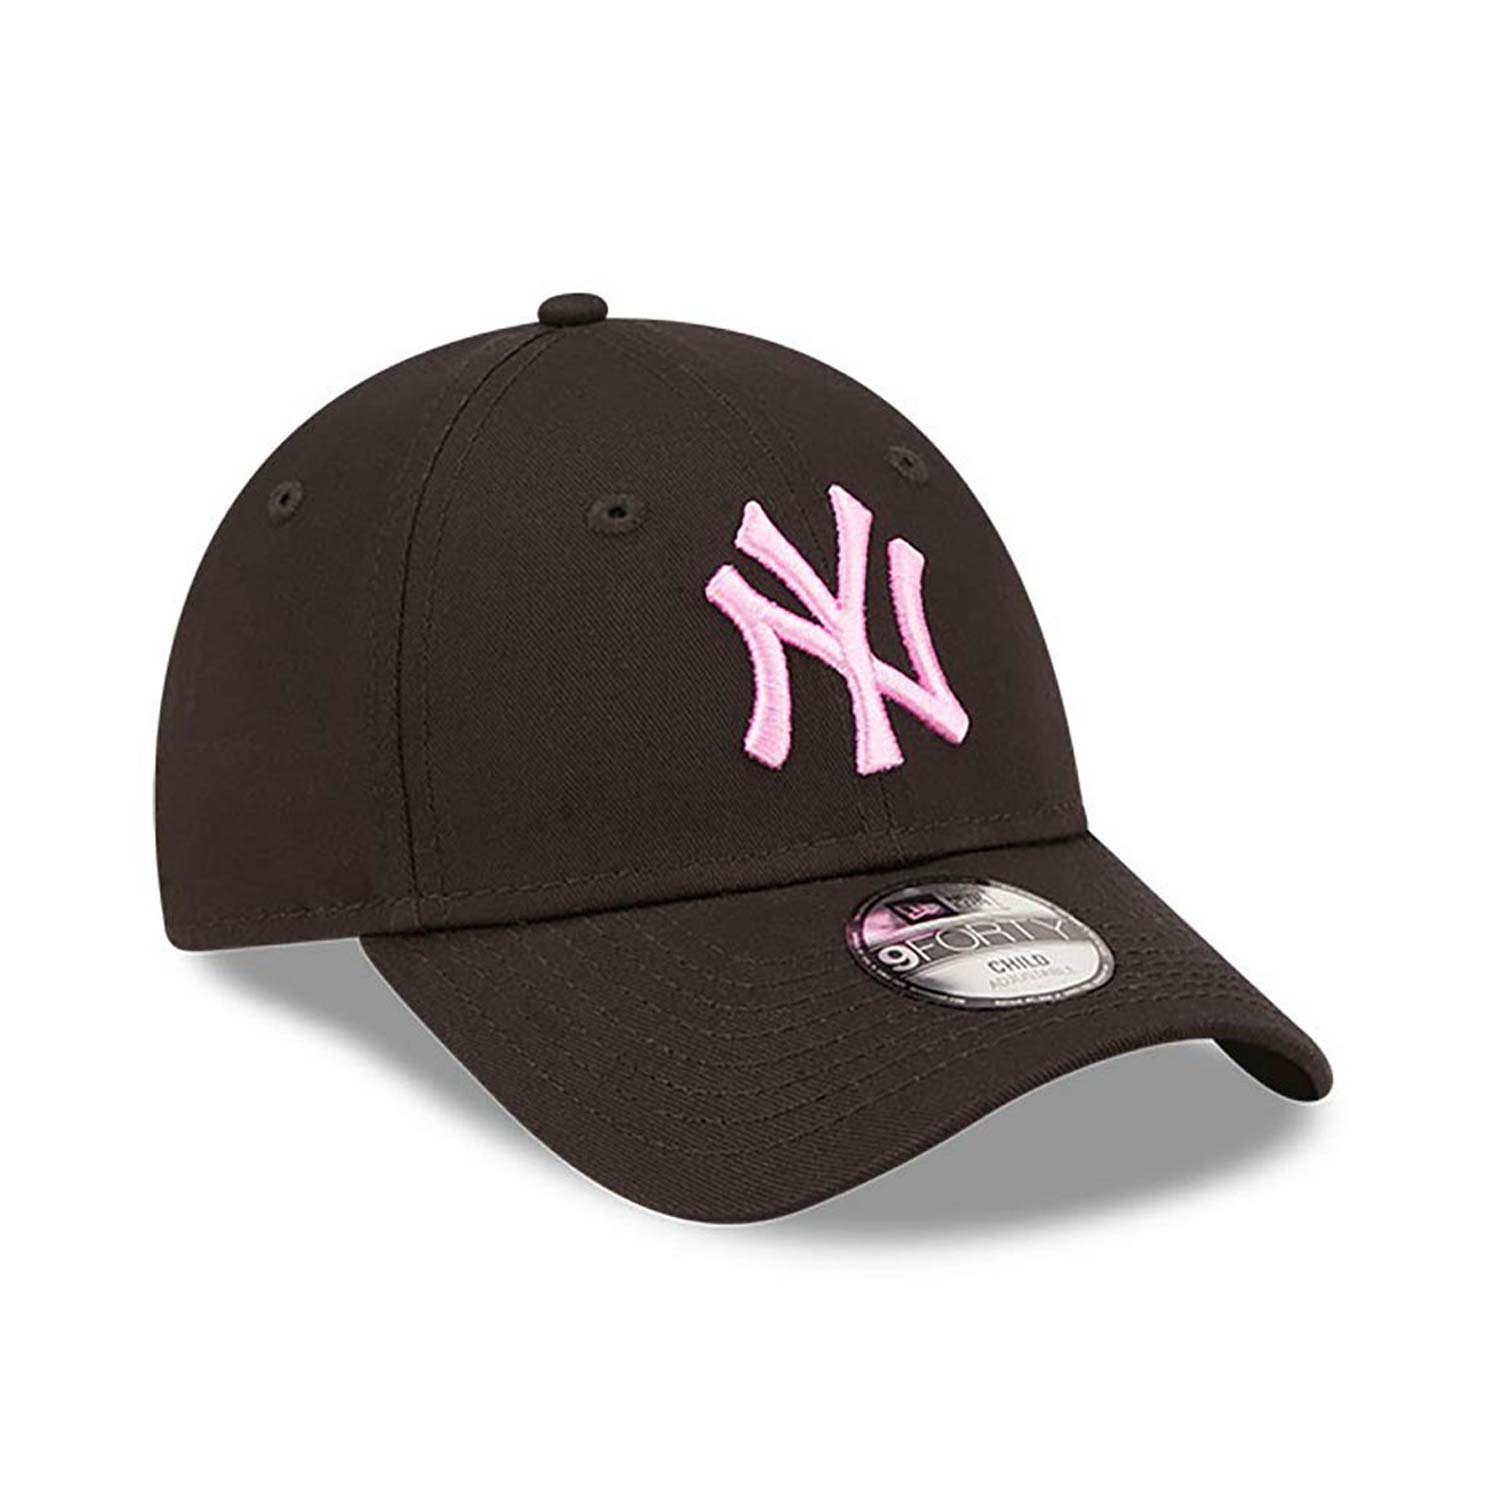 New York Yankees Child League Essential Black 9FORTY Cap